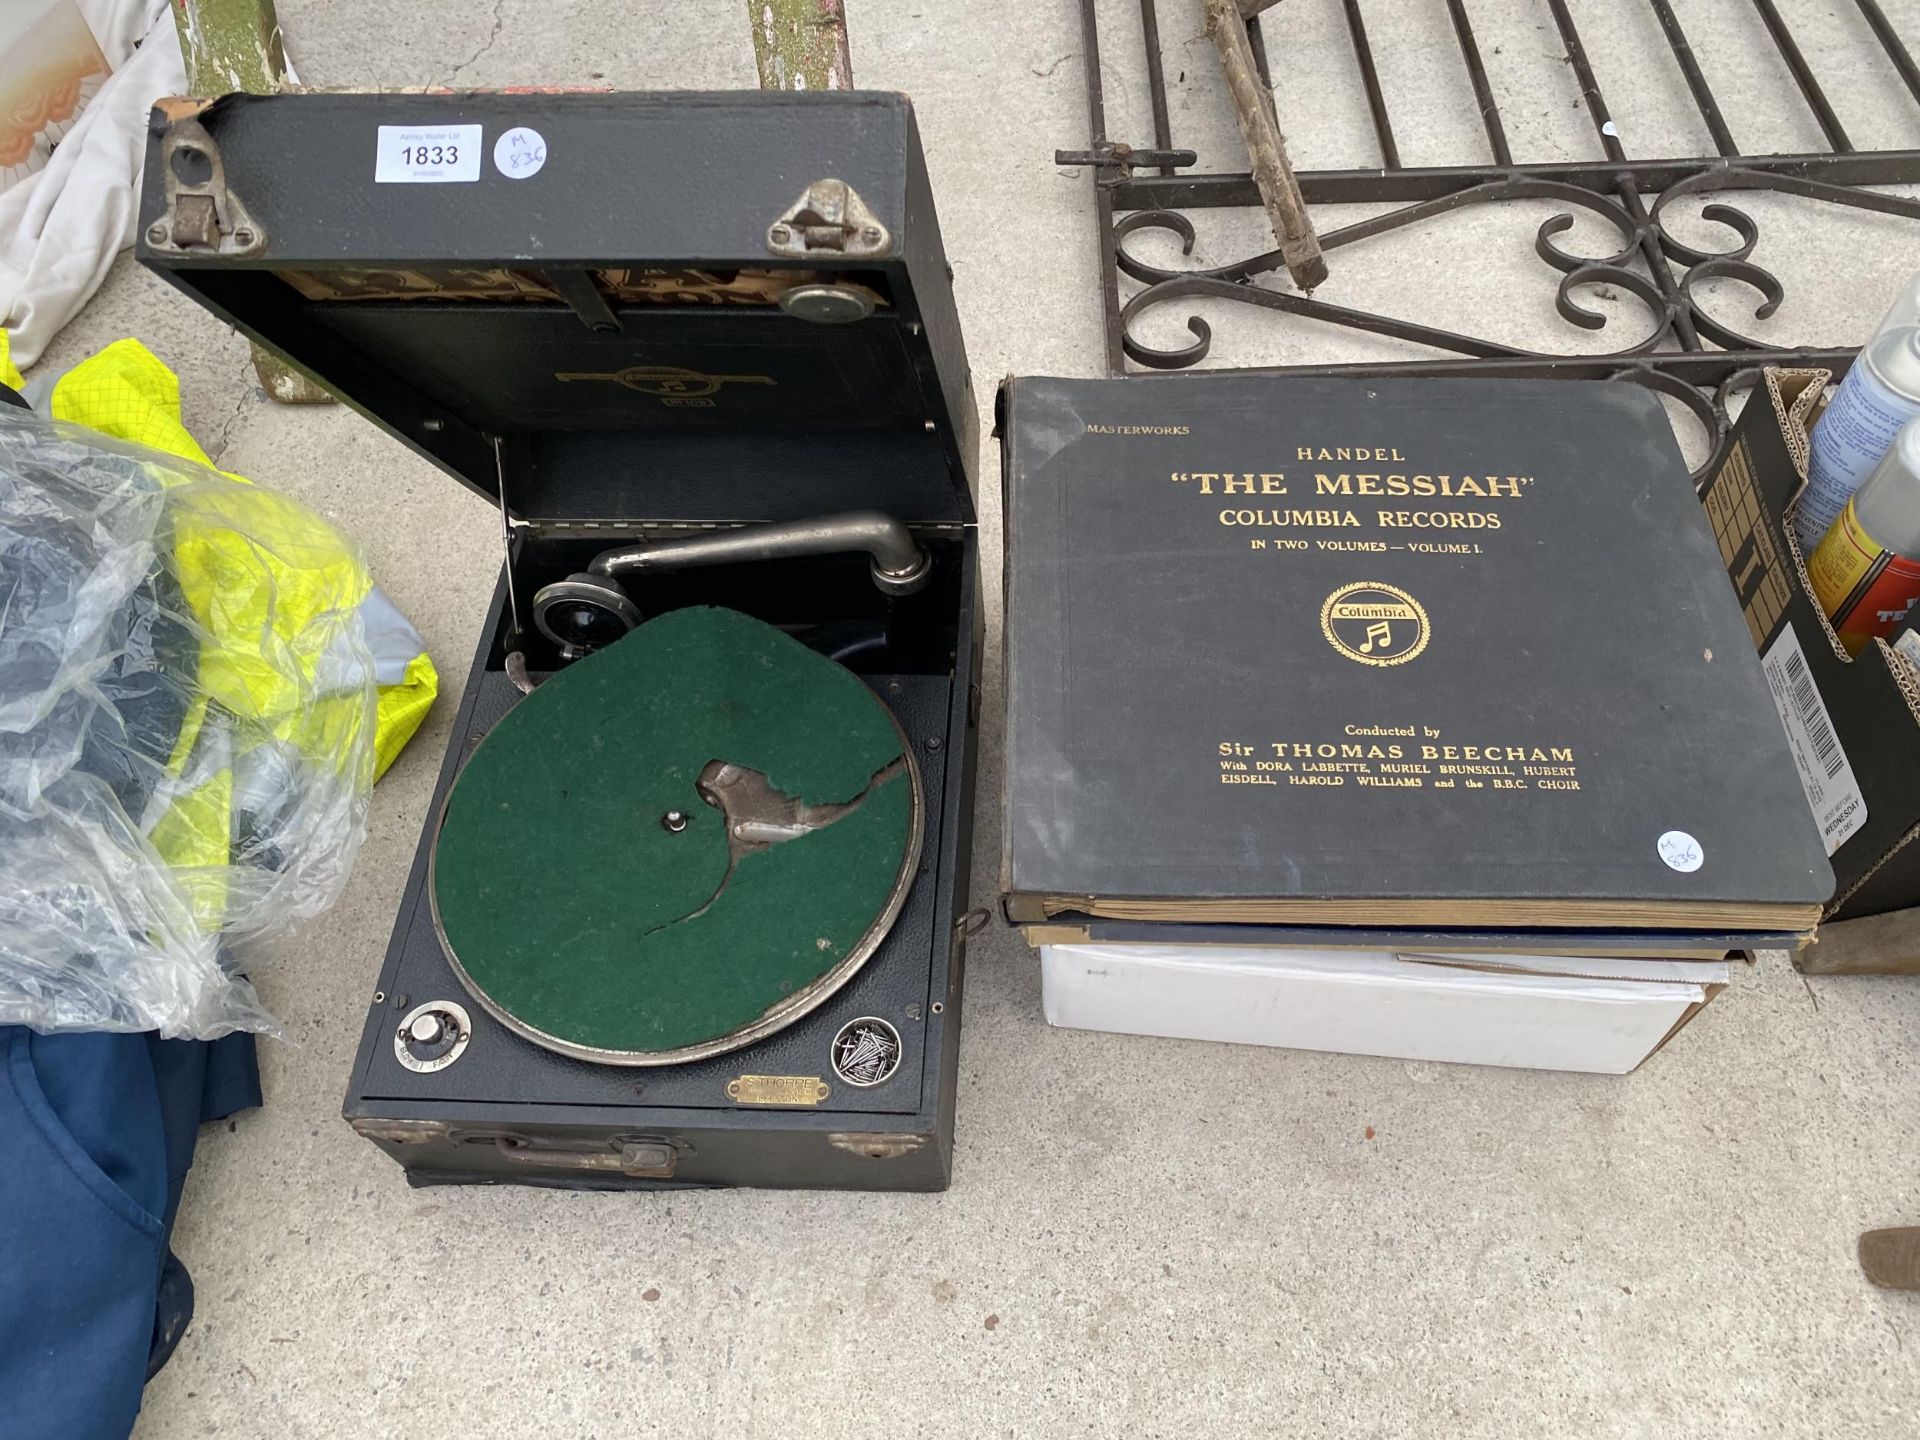 A COLUMBIA RECORD PLAYER AND AN ASSORTMENT OF LP RECORDS